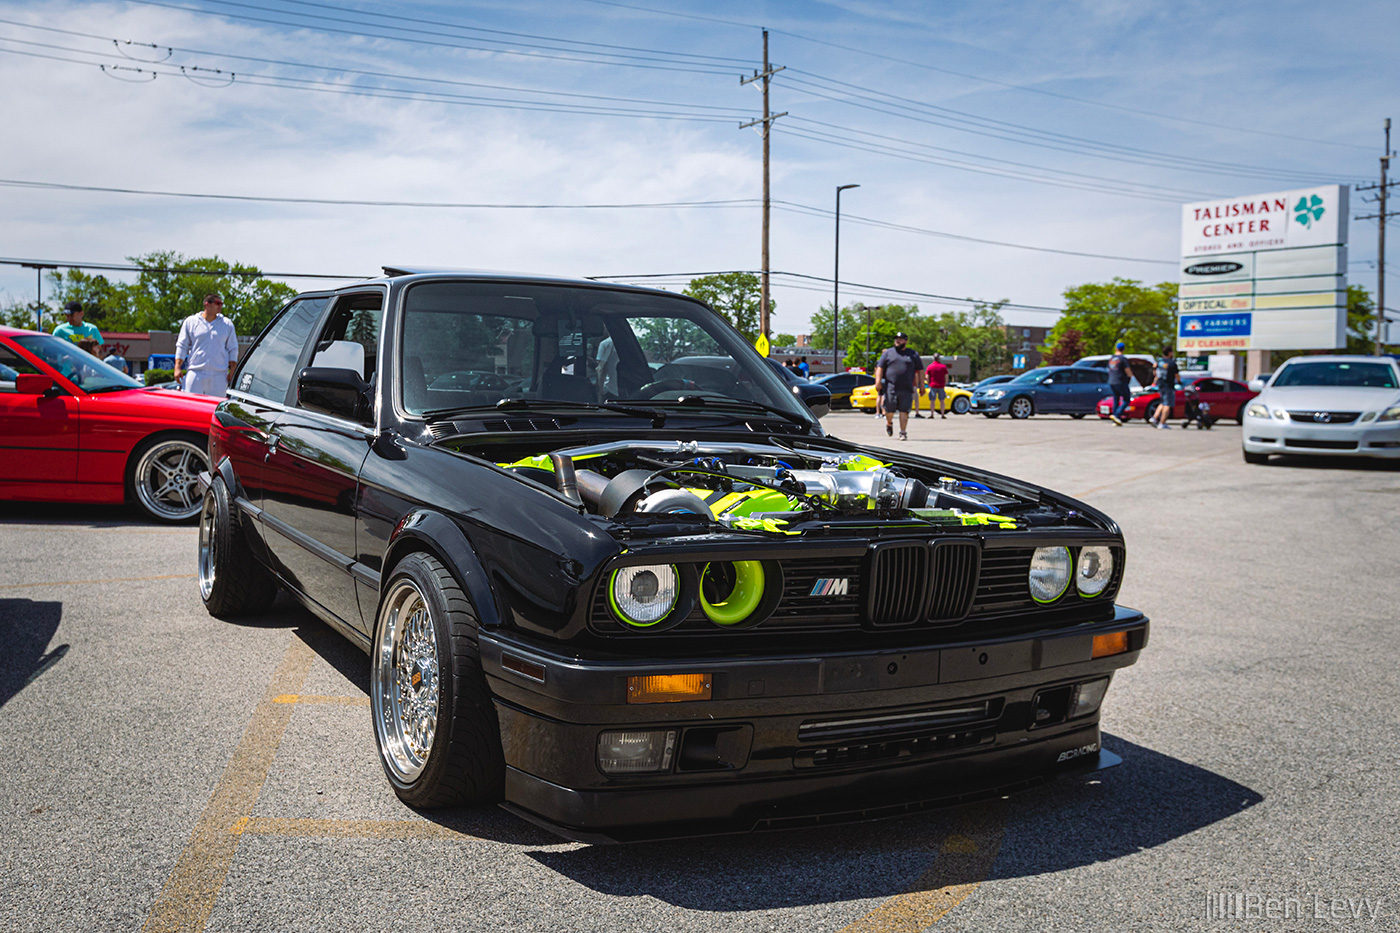 Black E30 BMW Coupe with Turbocharged M50